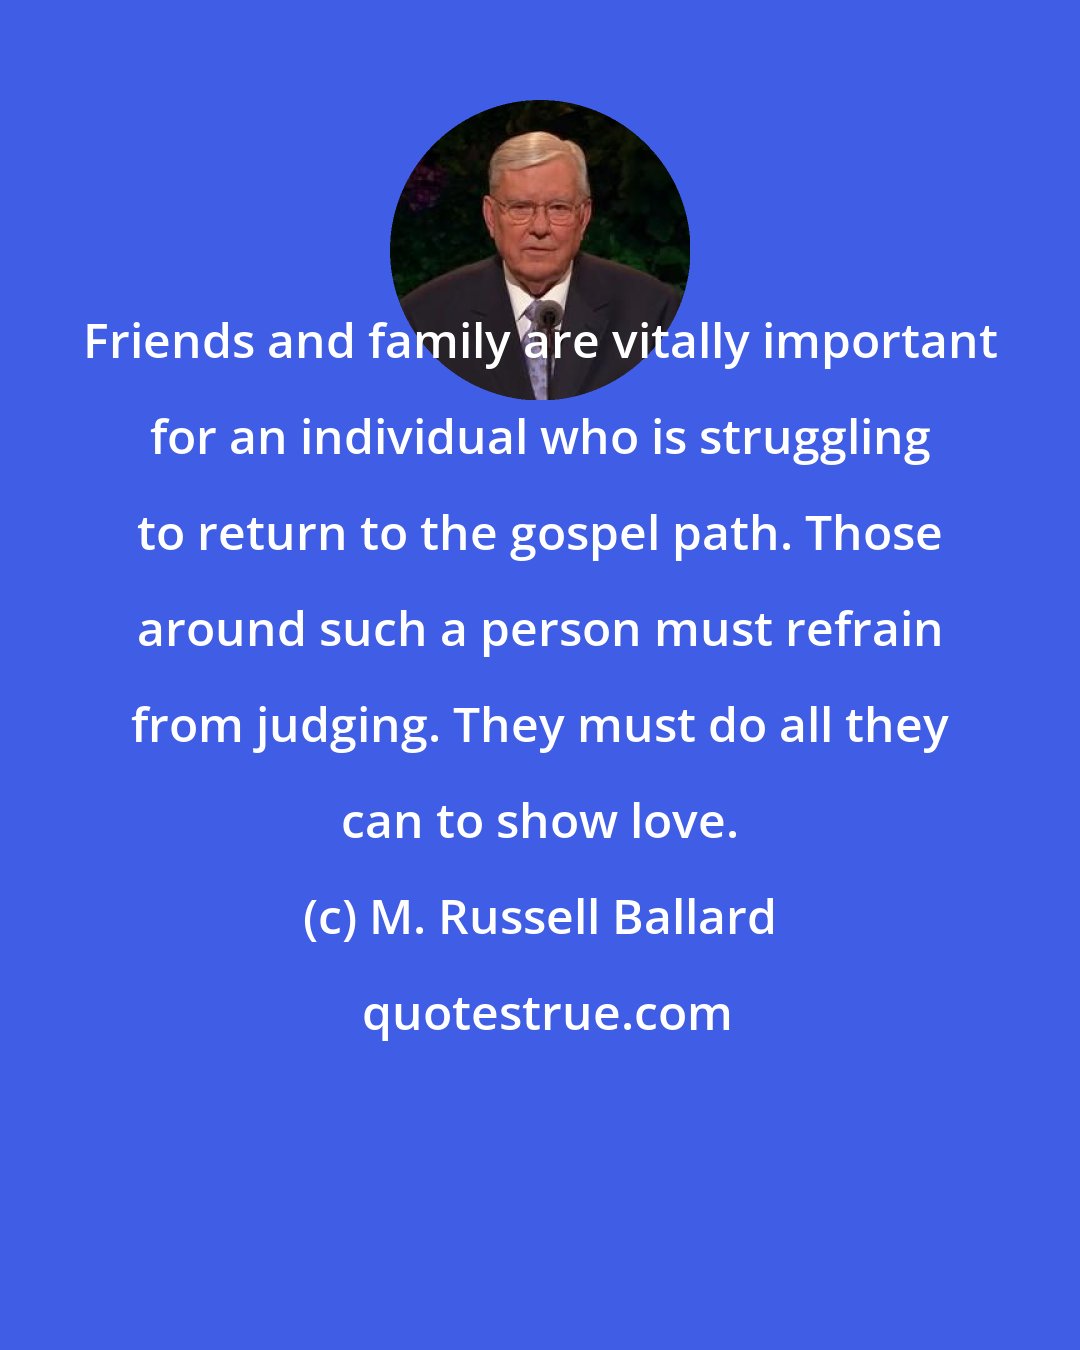 M. Russell Ballard: Friends and family are vitally important for an individual who is struggling to return to the gospel path. Those around such a person must refrain from judging. They must do all they can to show love.